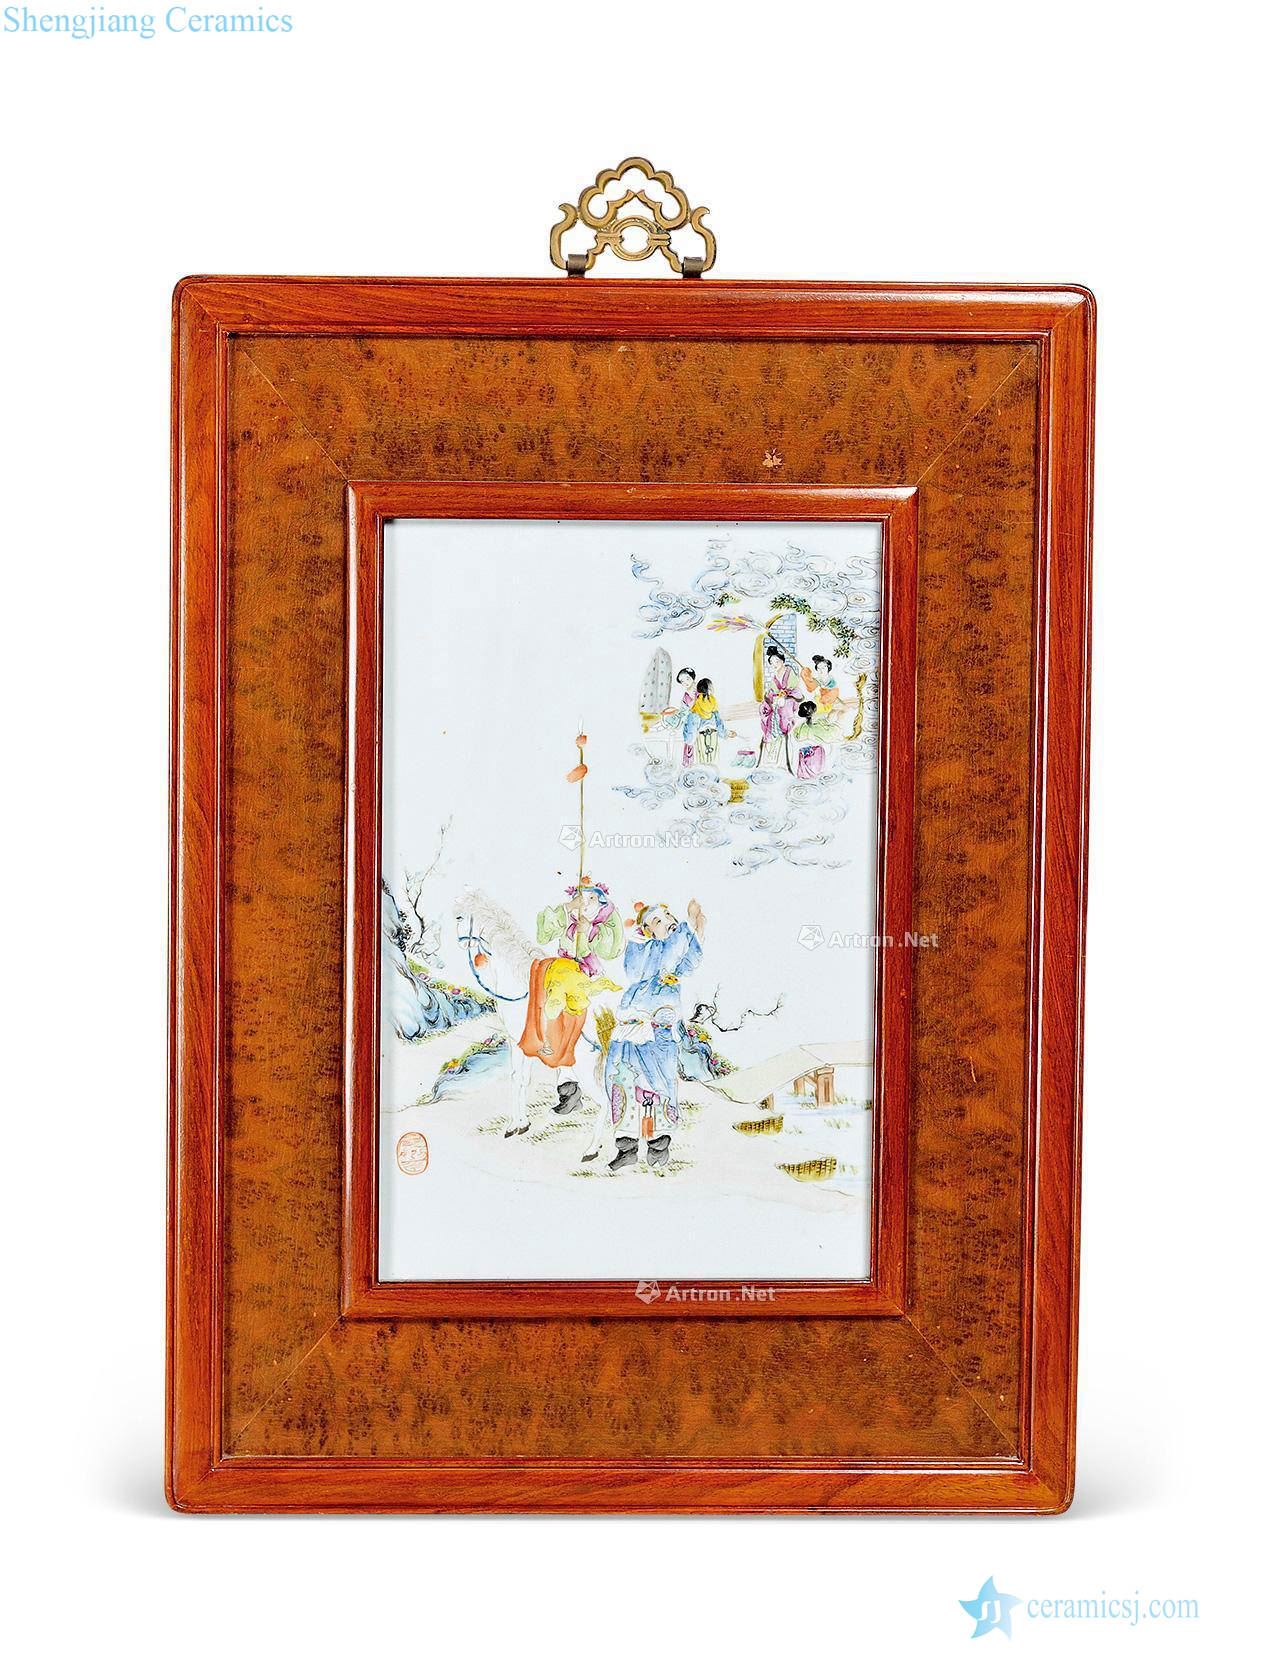 Clear the famille rose porcelain plate characters even a wooden frame